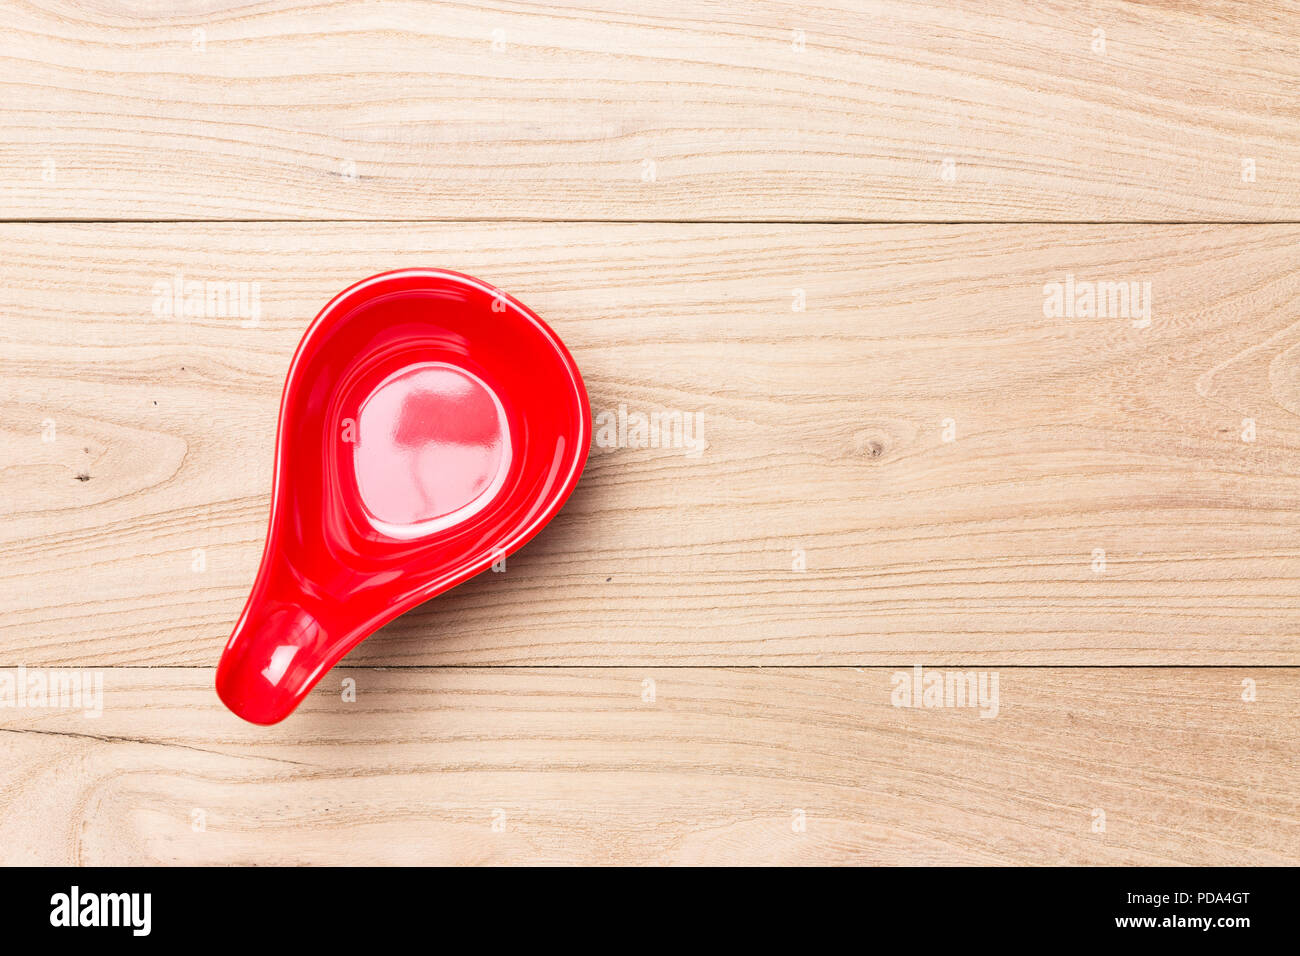 Red spoon in wood Stock Photo